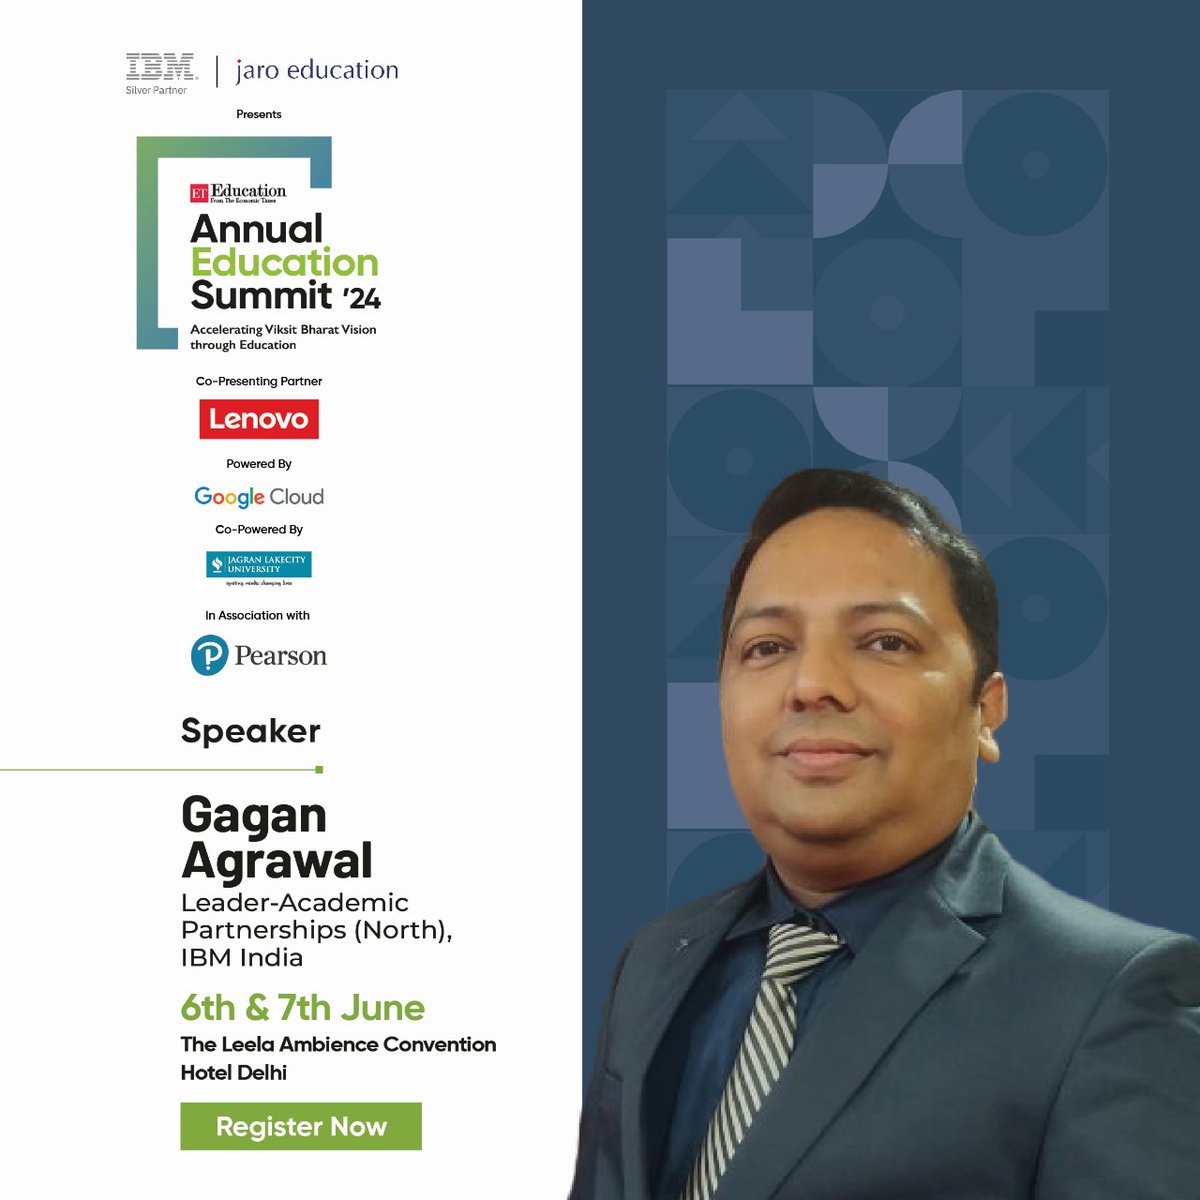 We're delighted to present our esteemed speaker at #ETAnnualEDUSummit, Gagan Agrawal, Leader - Academic Partnerships (North), @IBM India. 

Register Now - bit.ly/3PpTQJ9

#ETAnnualEDUSummit #ETEducation #Education #Summit #TechEdu #EdTech #TechInEducation #School